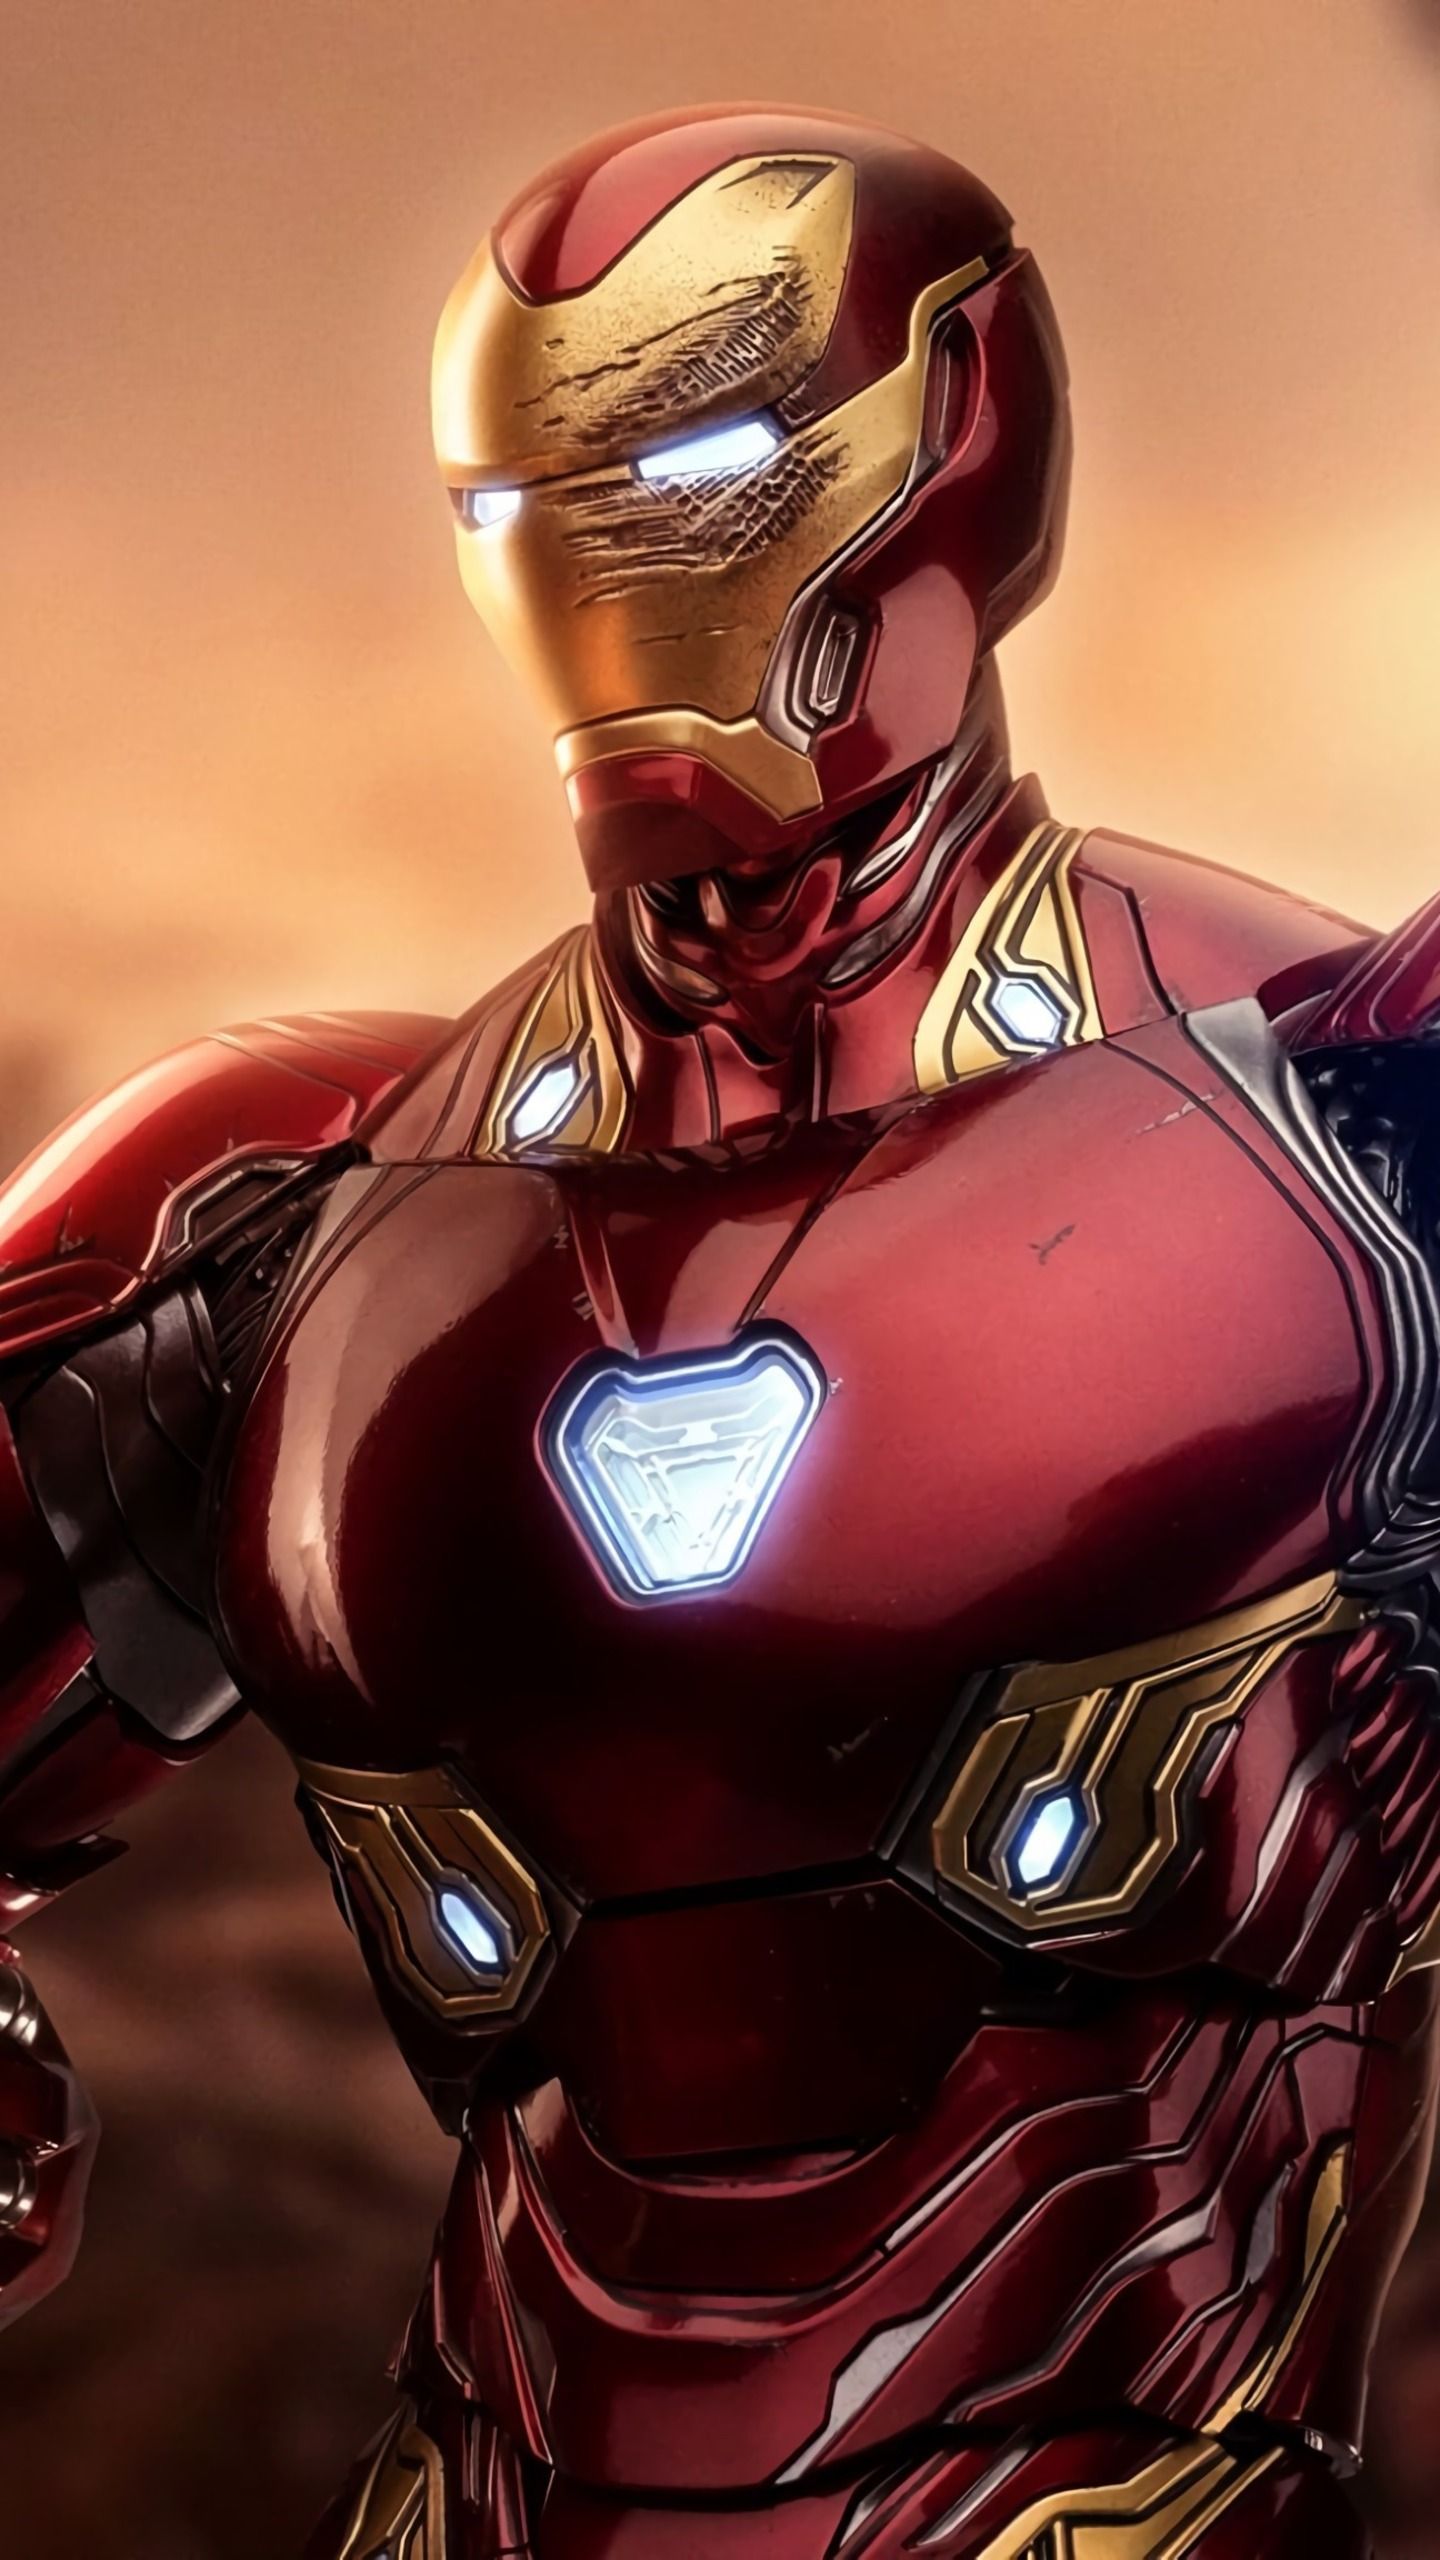 Who Will Be The New Iron Man After Avengers: Endgame?. Iron man